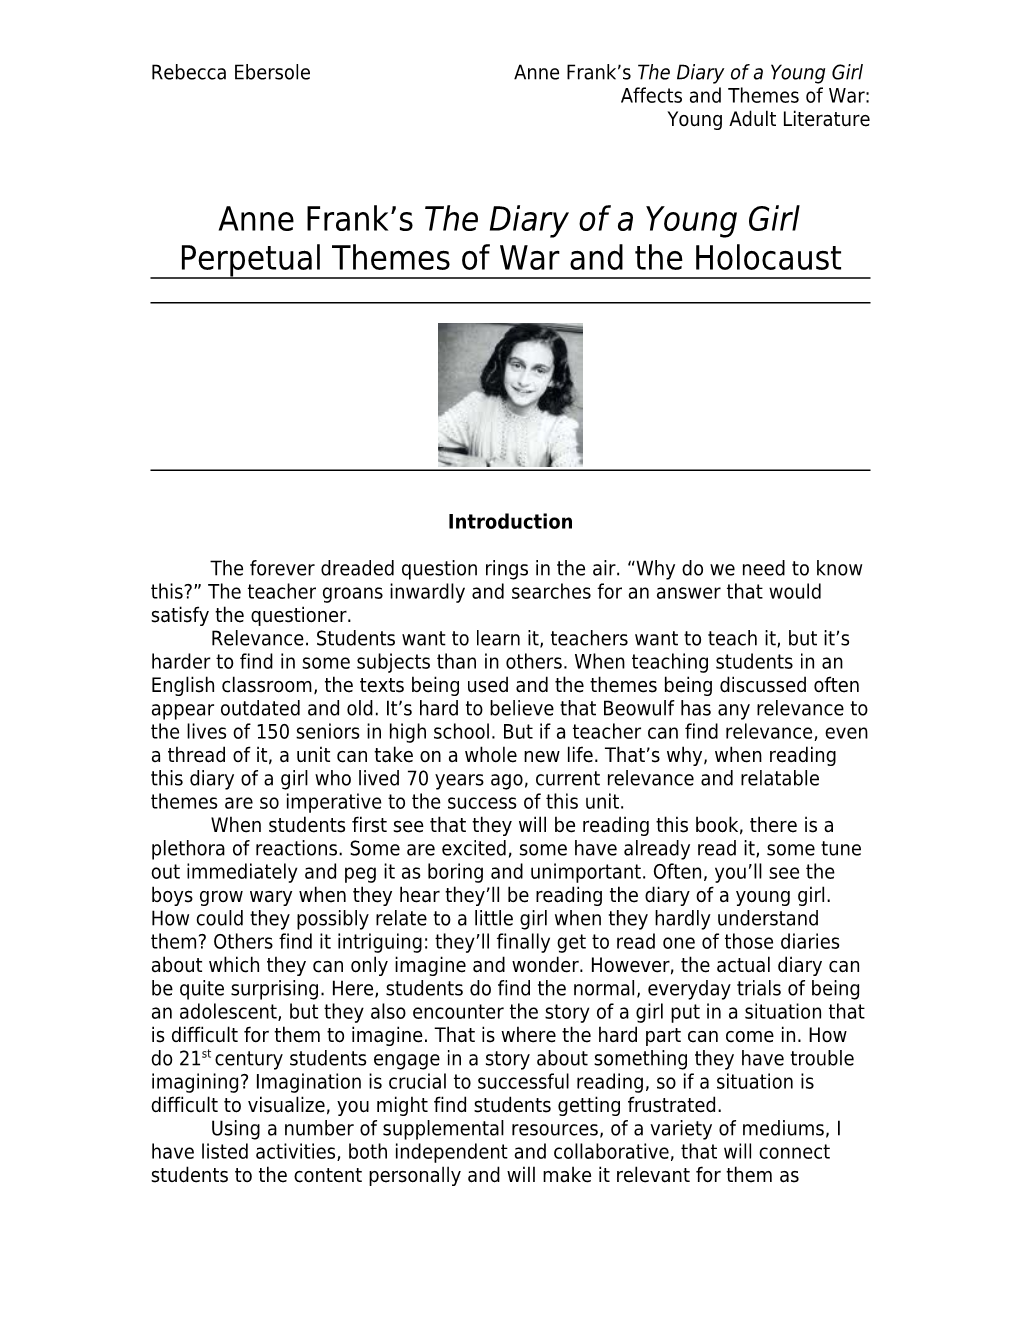 Anne Frank S the Diary of a Young Girl